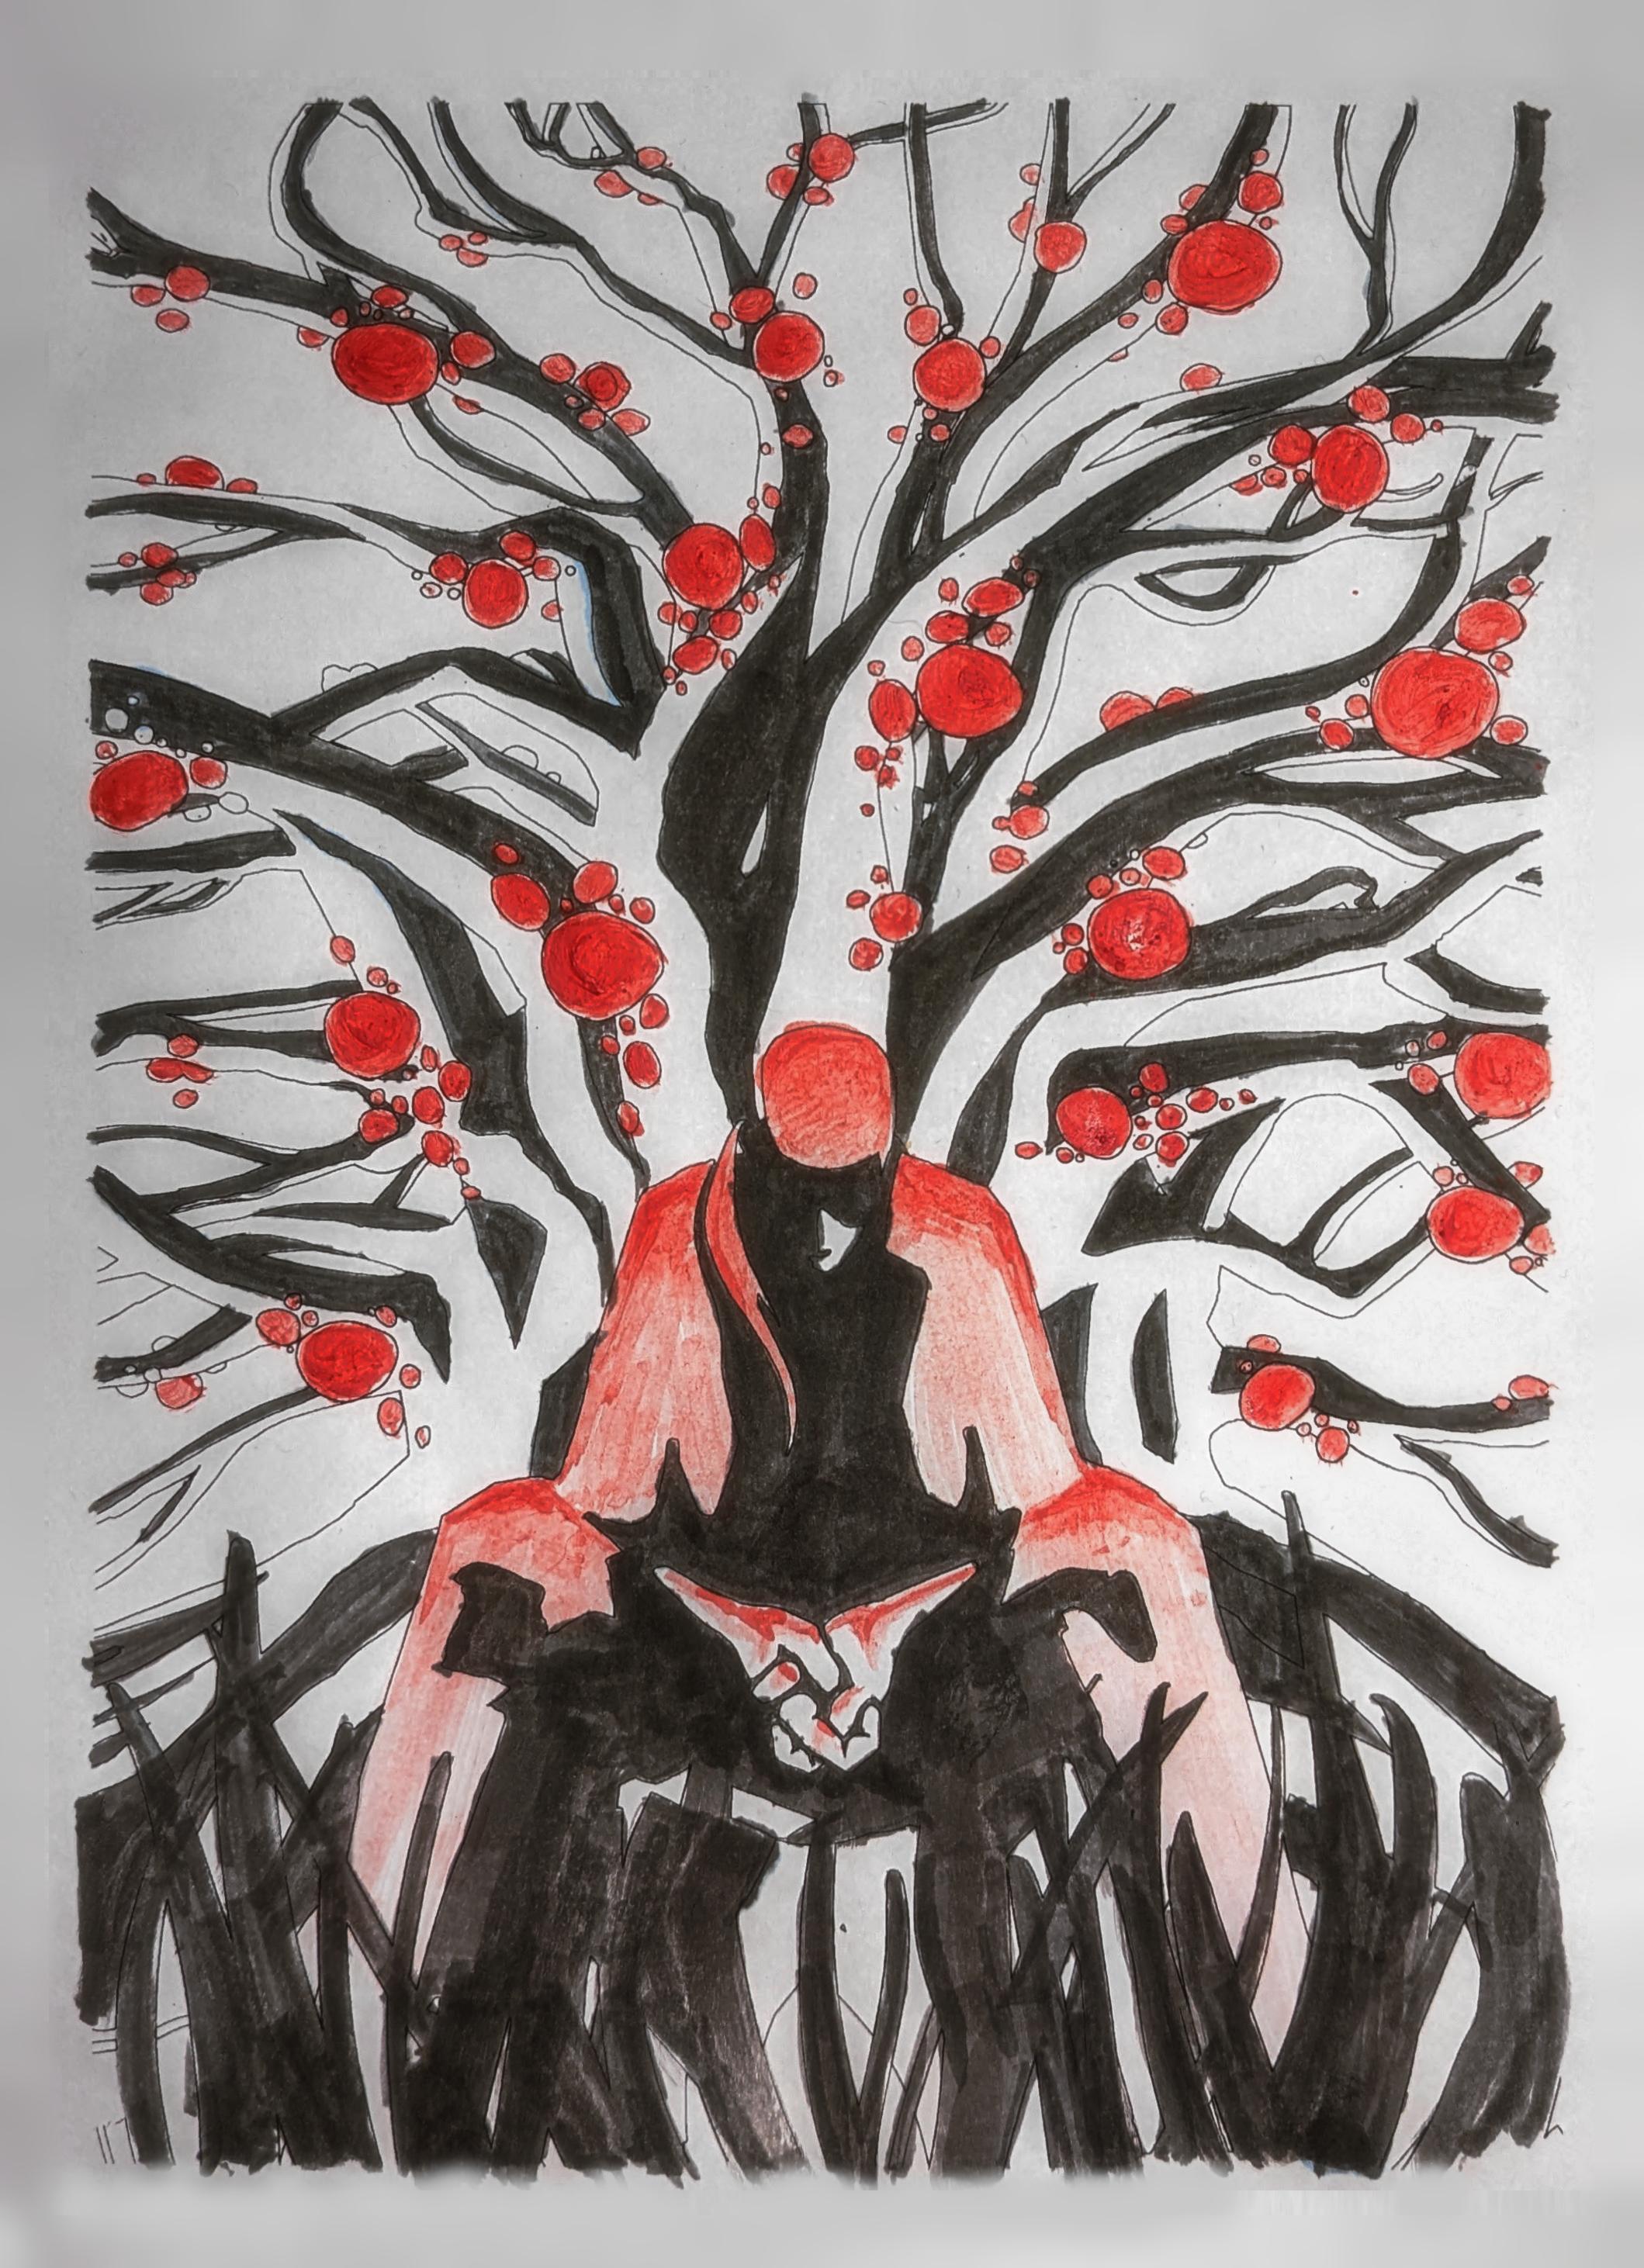 Erika is seated beneath the world tree, face heavily shaded. Its boughs
spread above her, globes of luminous fruit growing on its limbs. The shadows are grey ink,
the fruit in bright red paint.